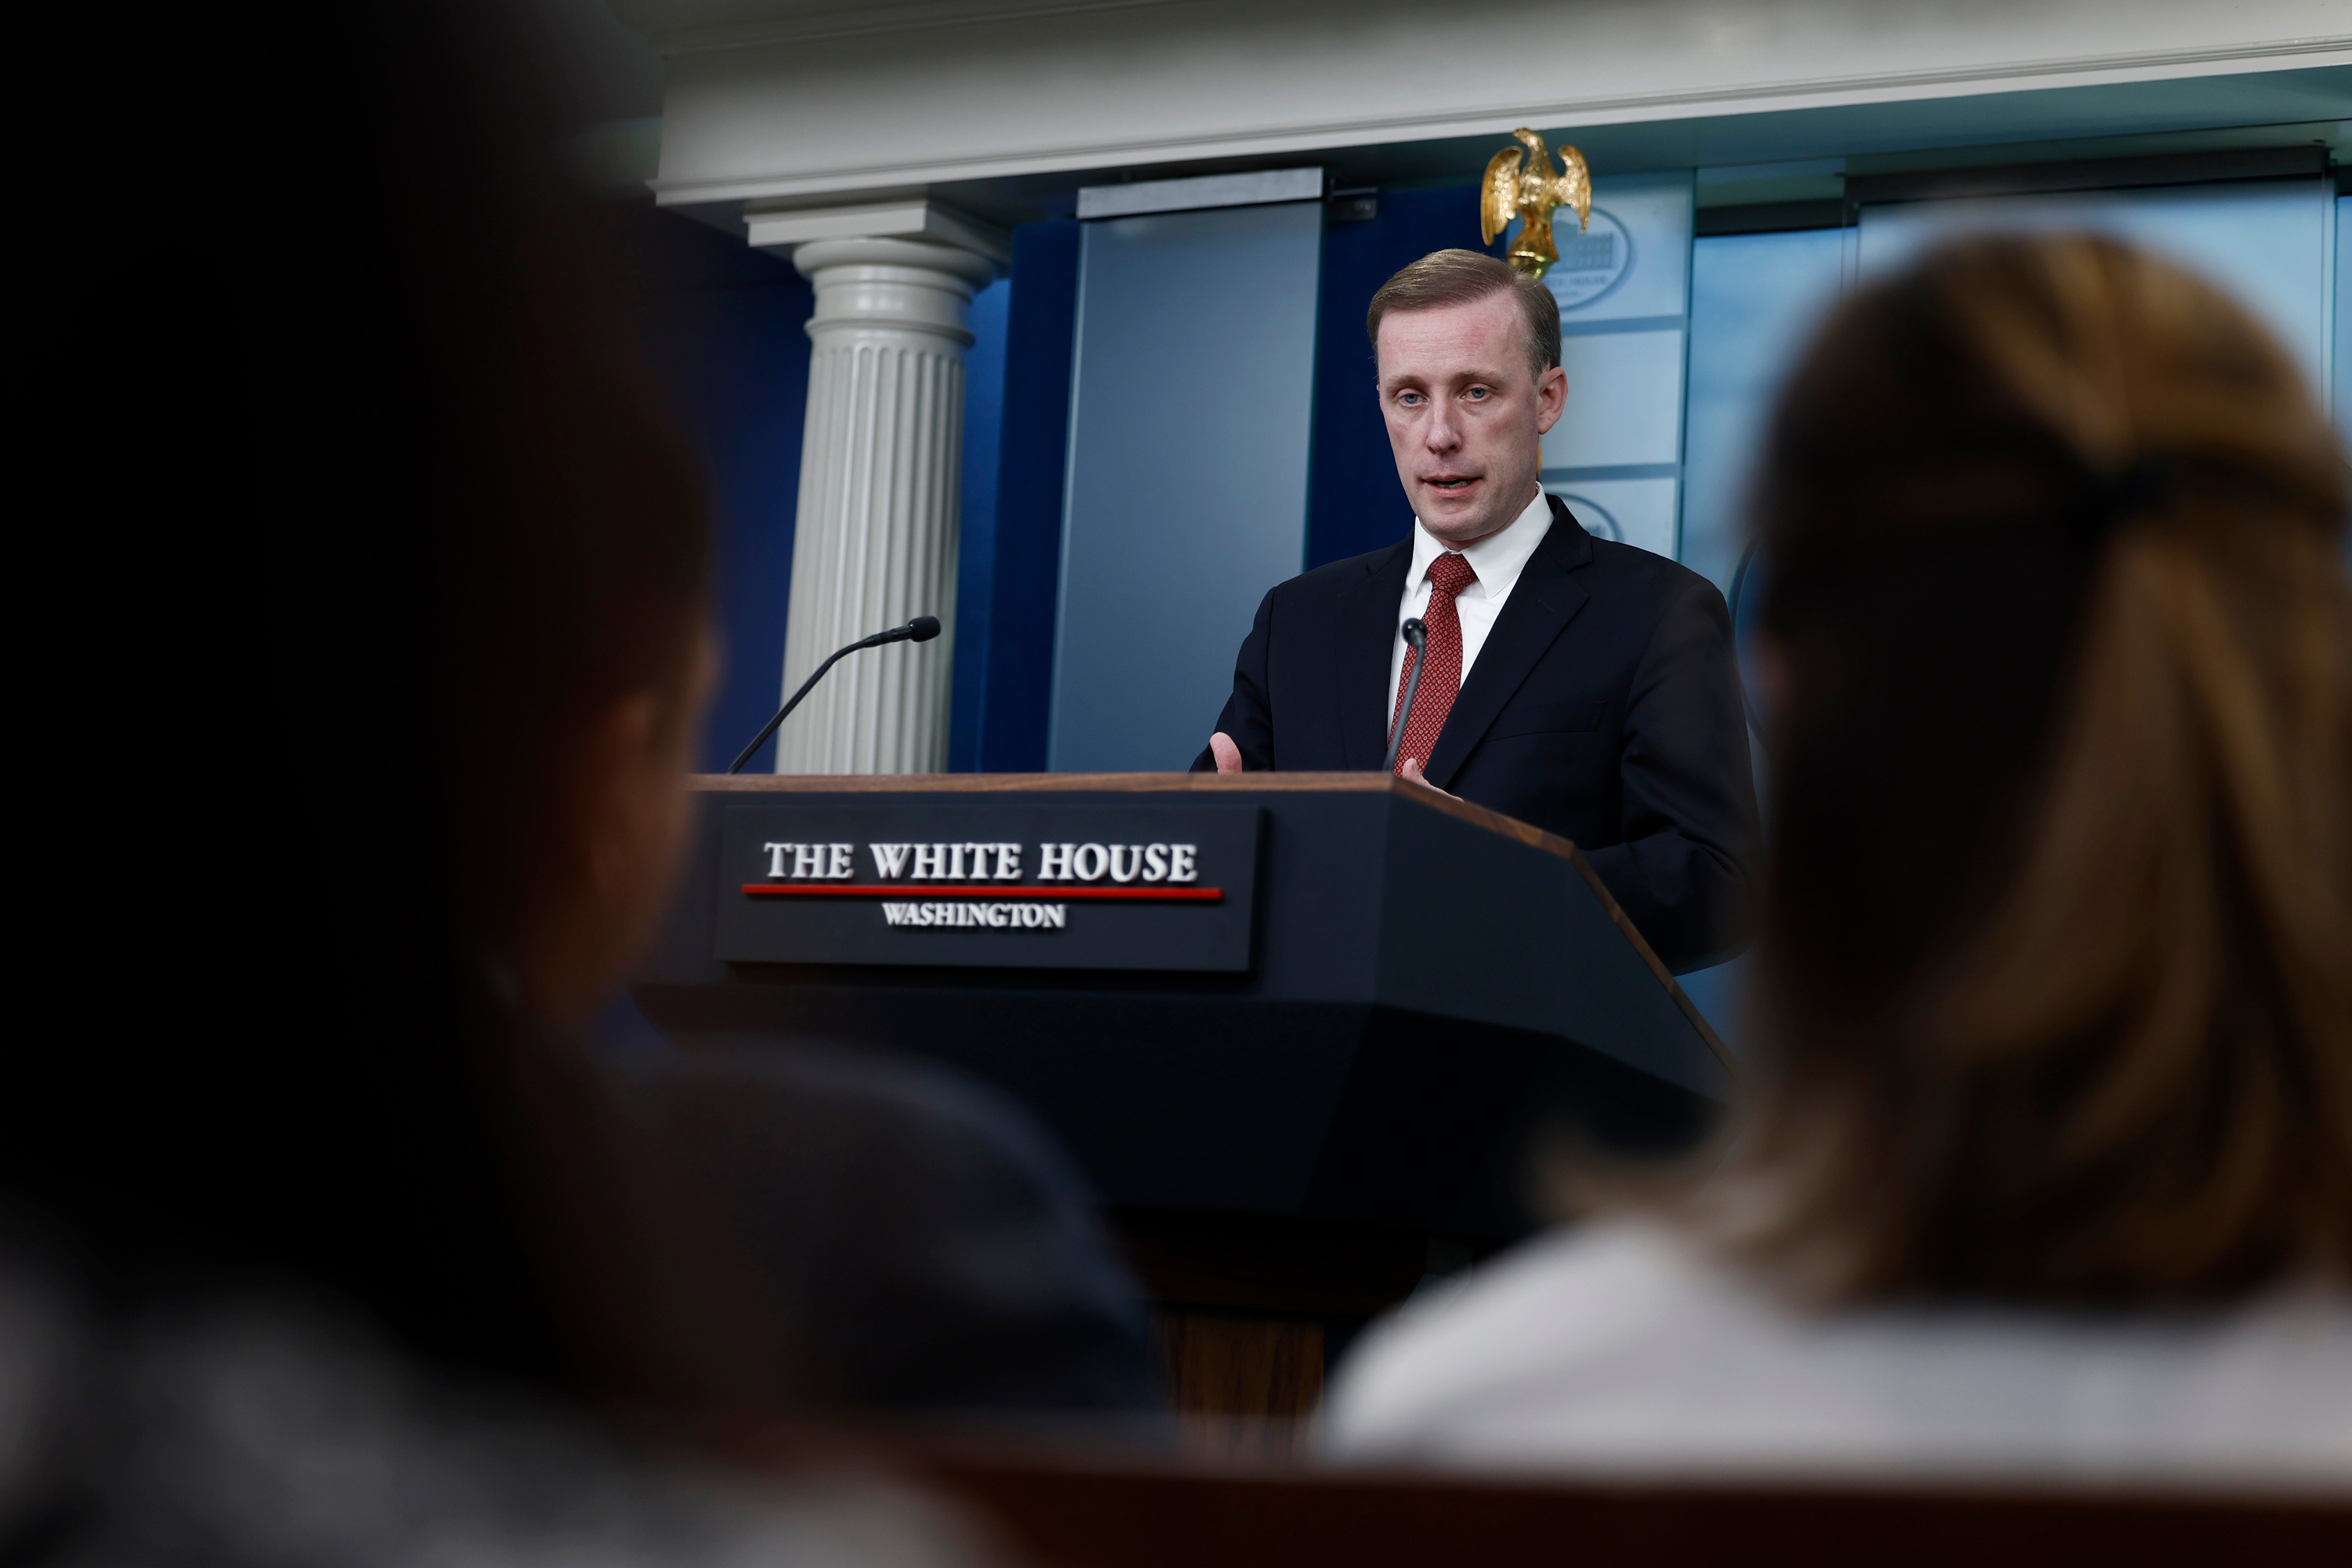 Jake Sullivan speaks during a news briefing at the White House in Washington, DC on March 18.